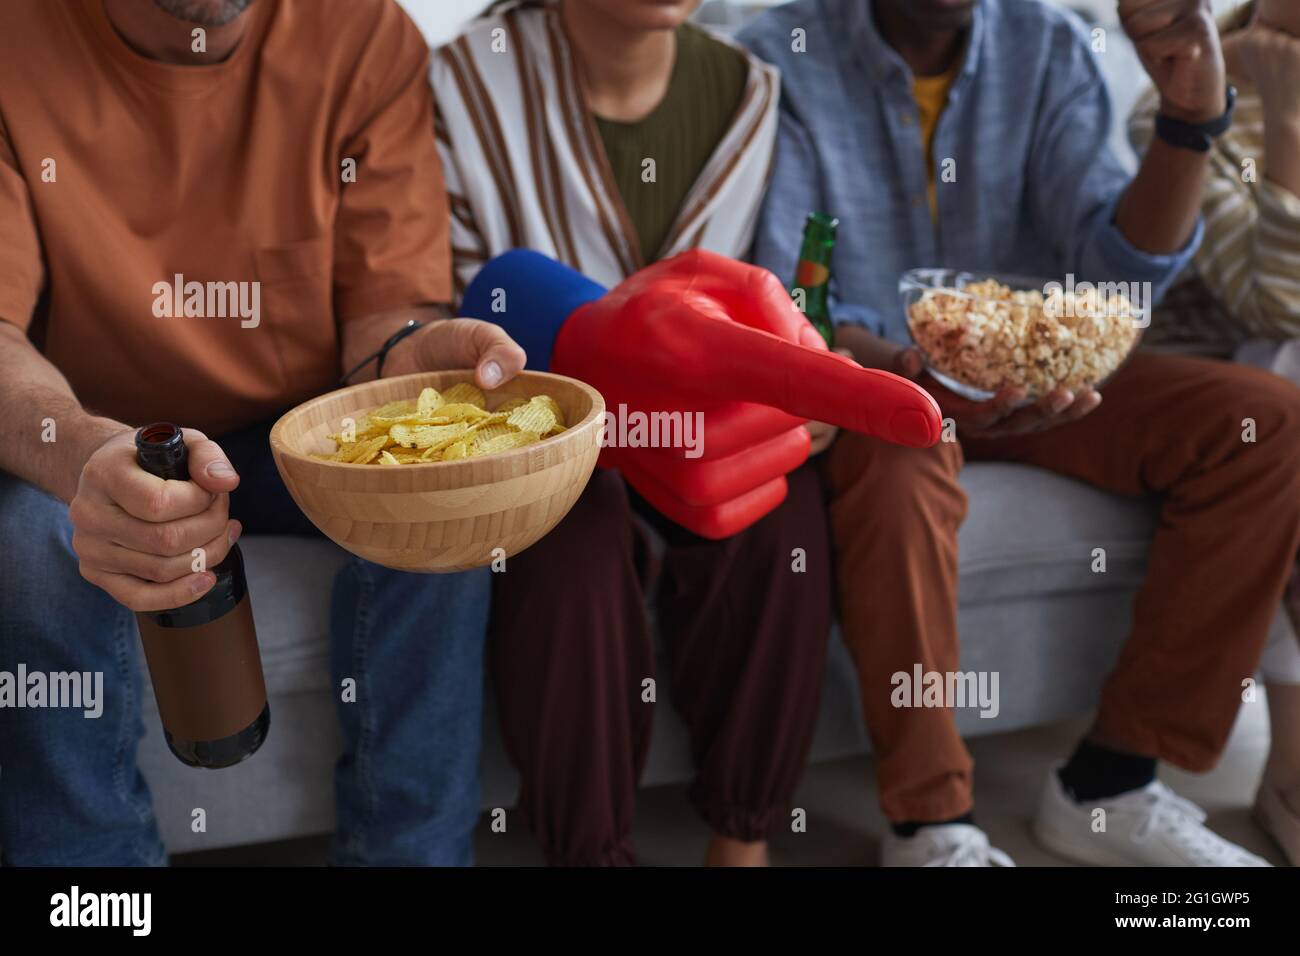 Close up of sports fans holding snacks while watching game match together, copy space Stock Photo